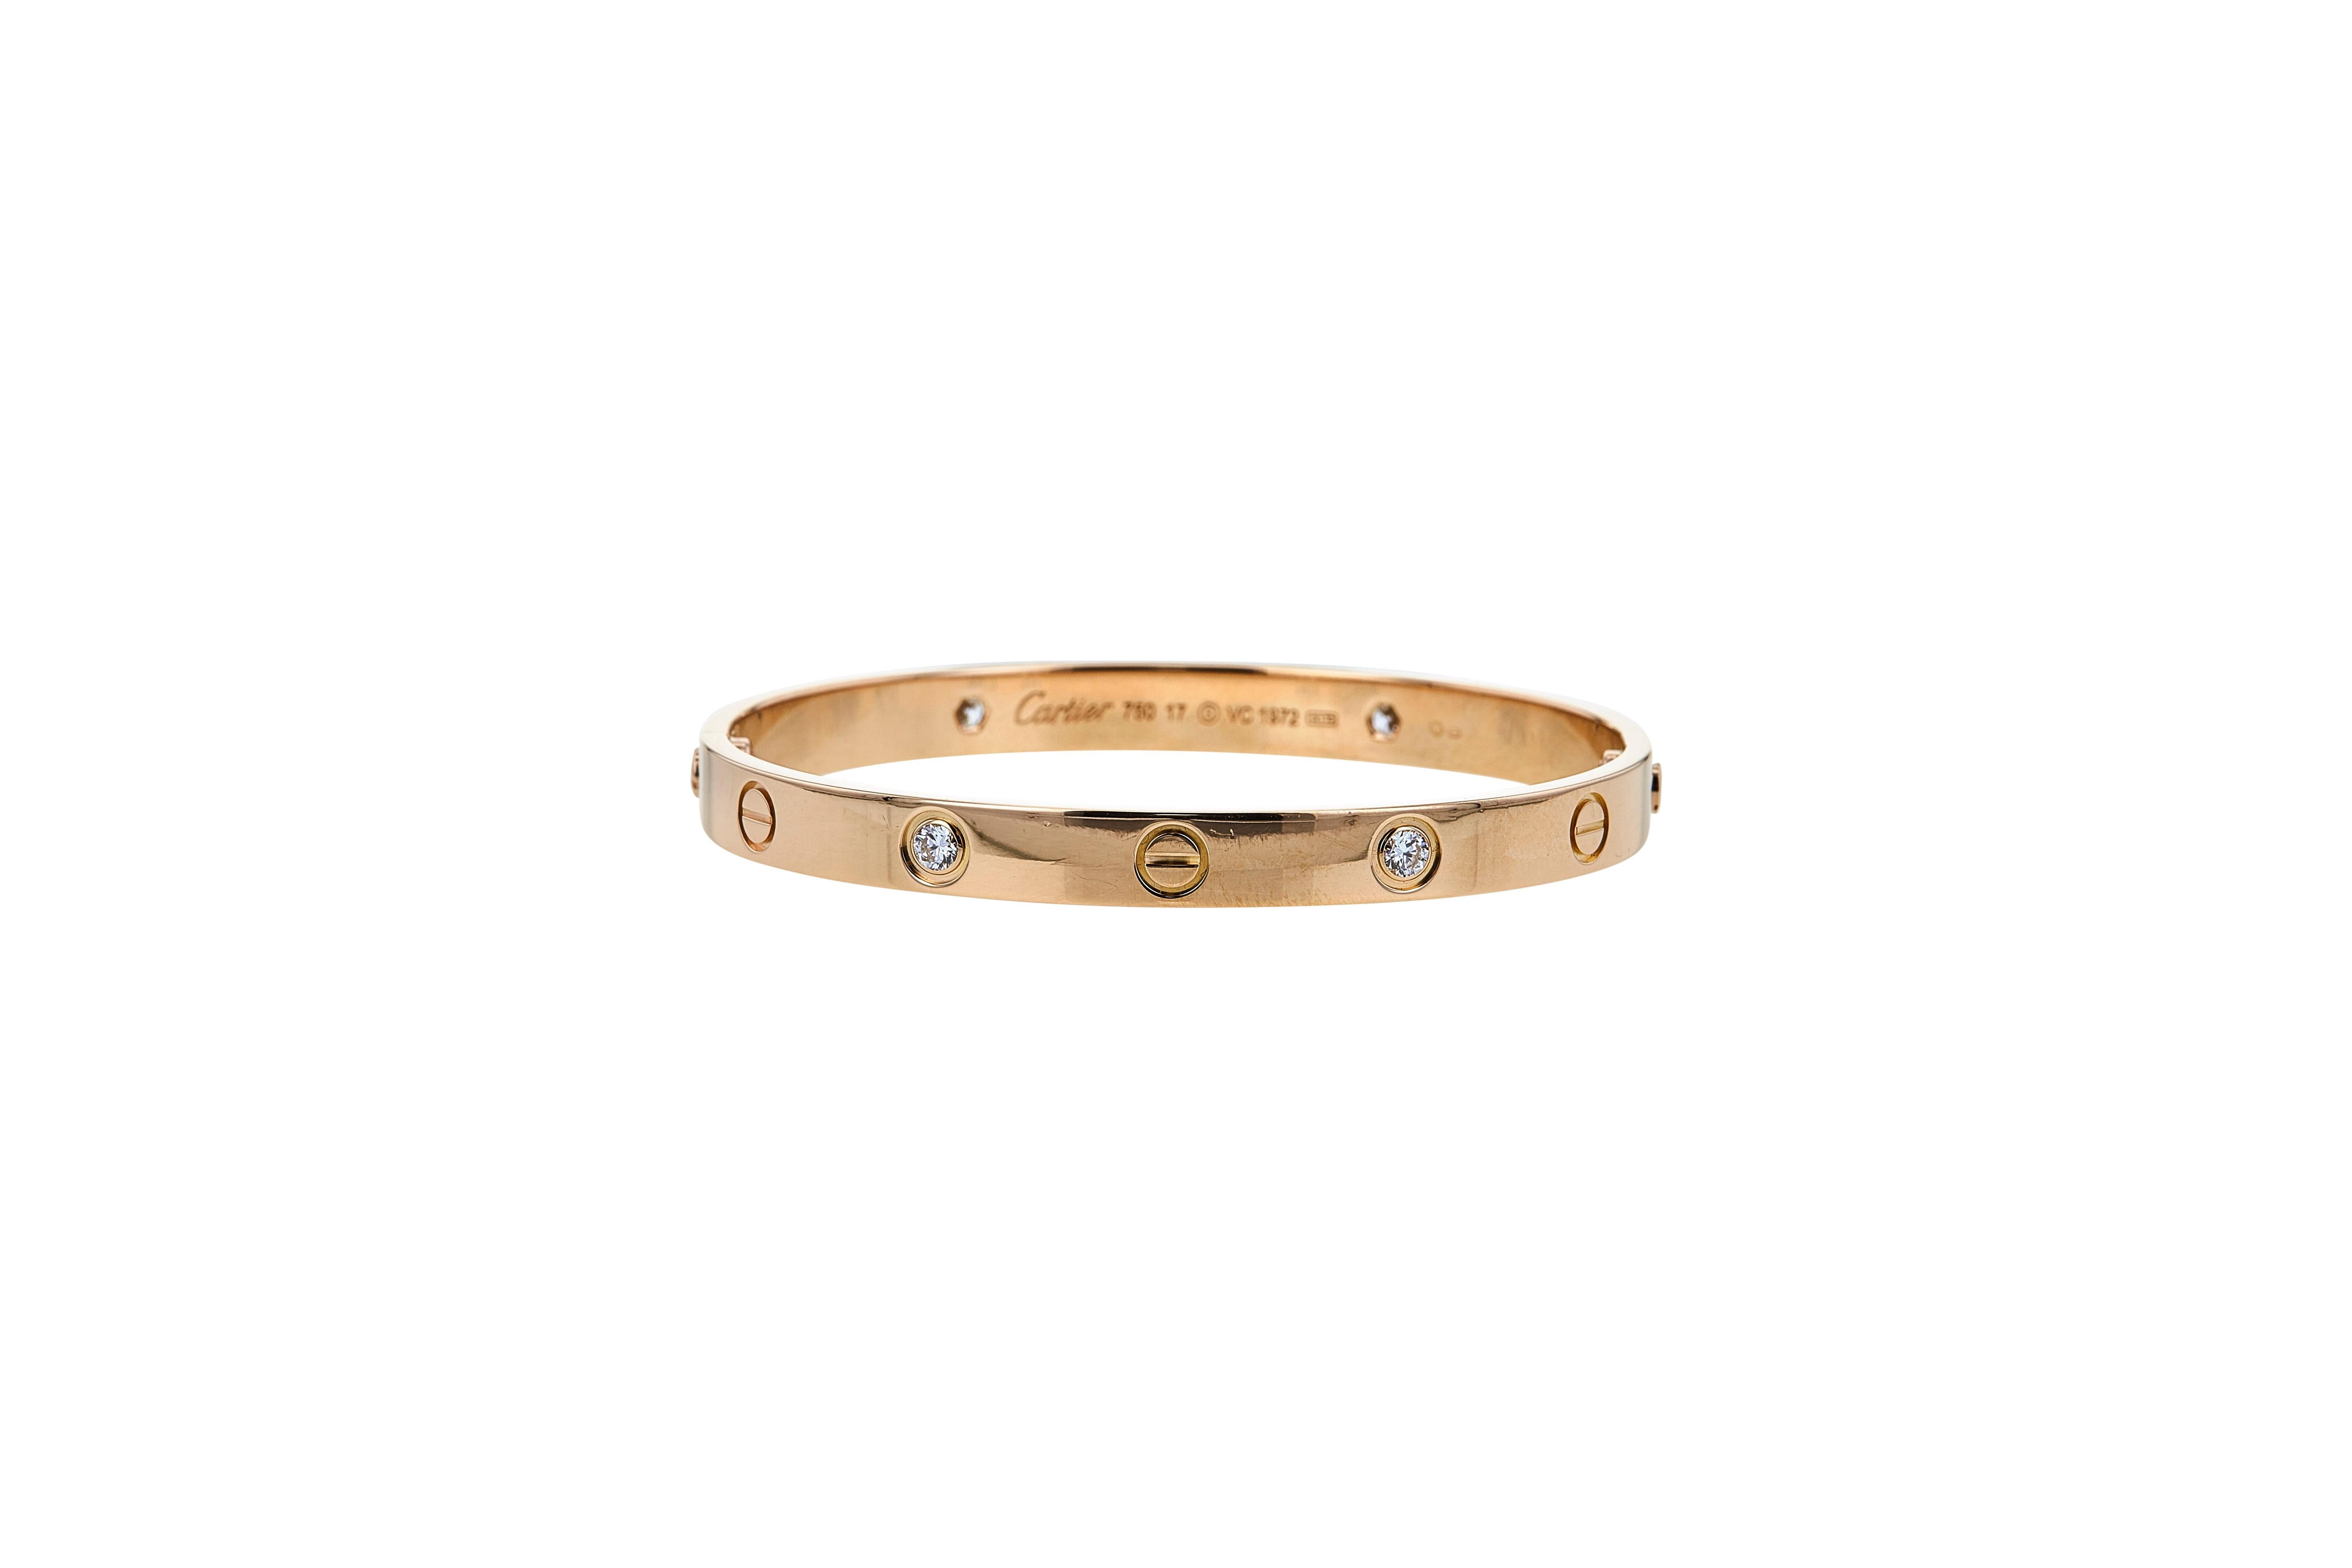 Authentic Cartier 'Love' bracelet crafted in 18 karat rose gold, set with four round brilliant cut diamonds weighing an estimated 0.42 carats total weight. Size 17. Signed Cartier, 750, with serial number and hallmarks. The bracelet is presented